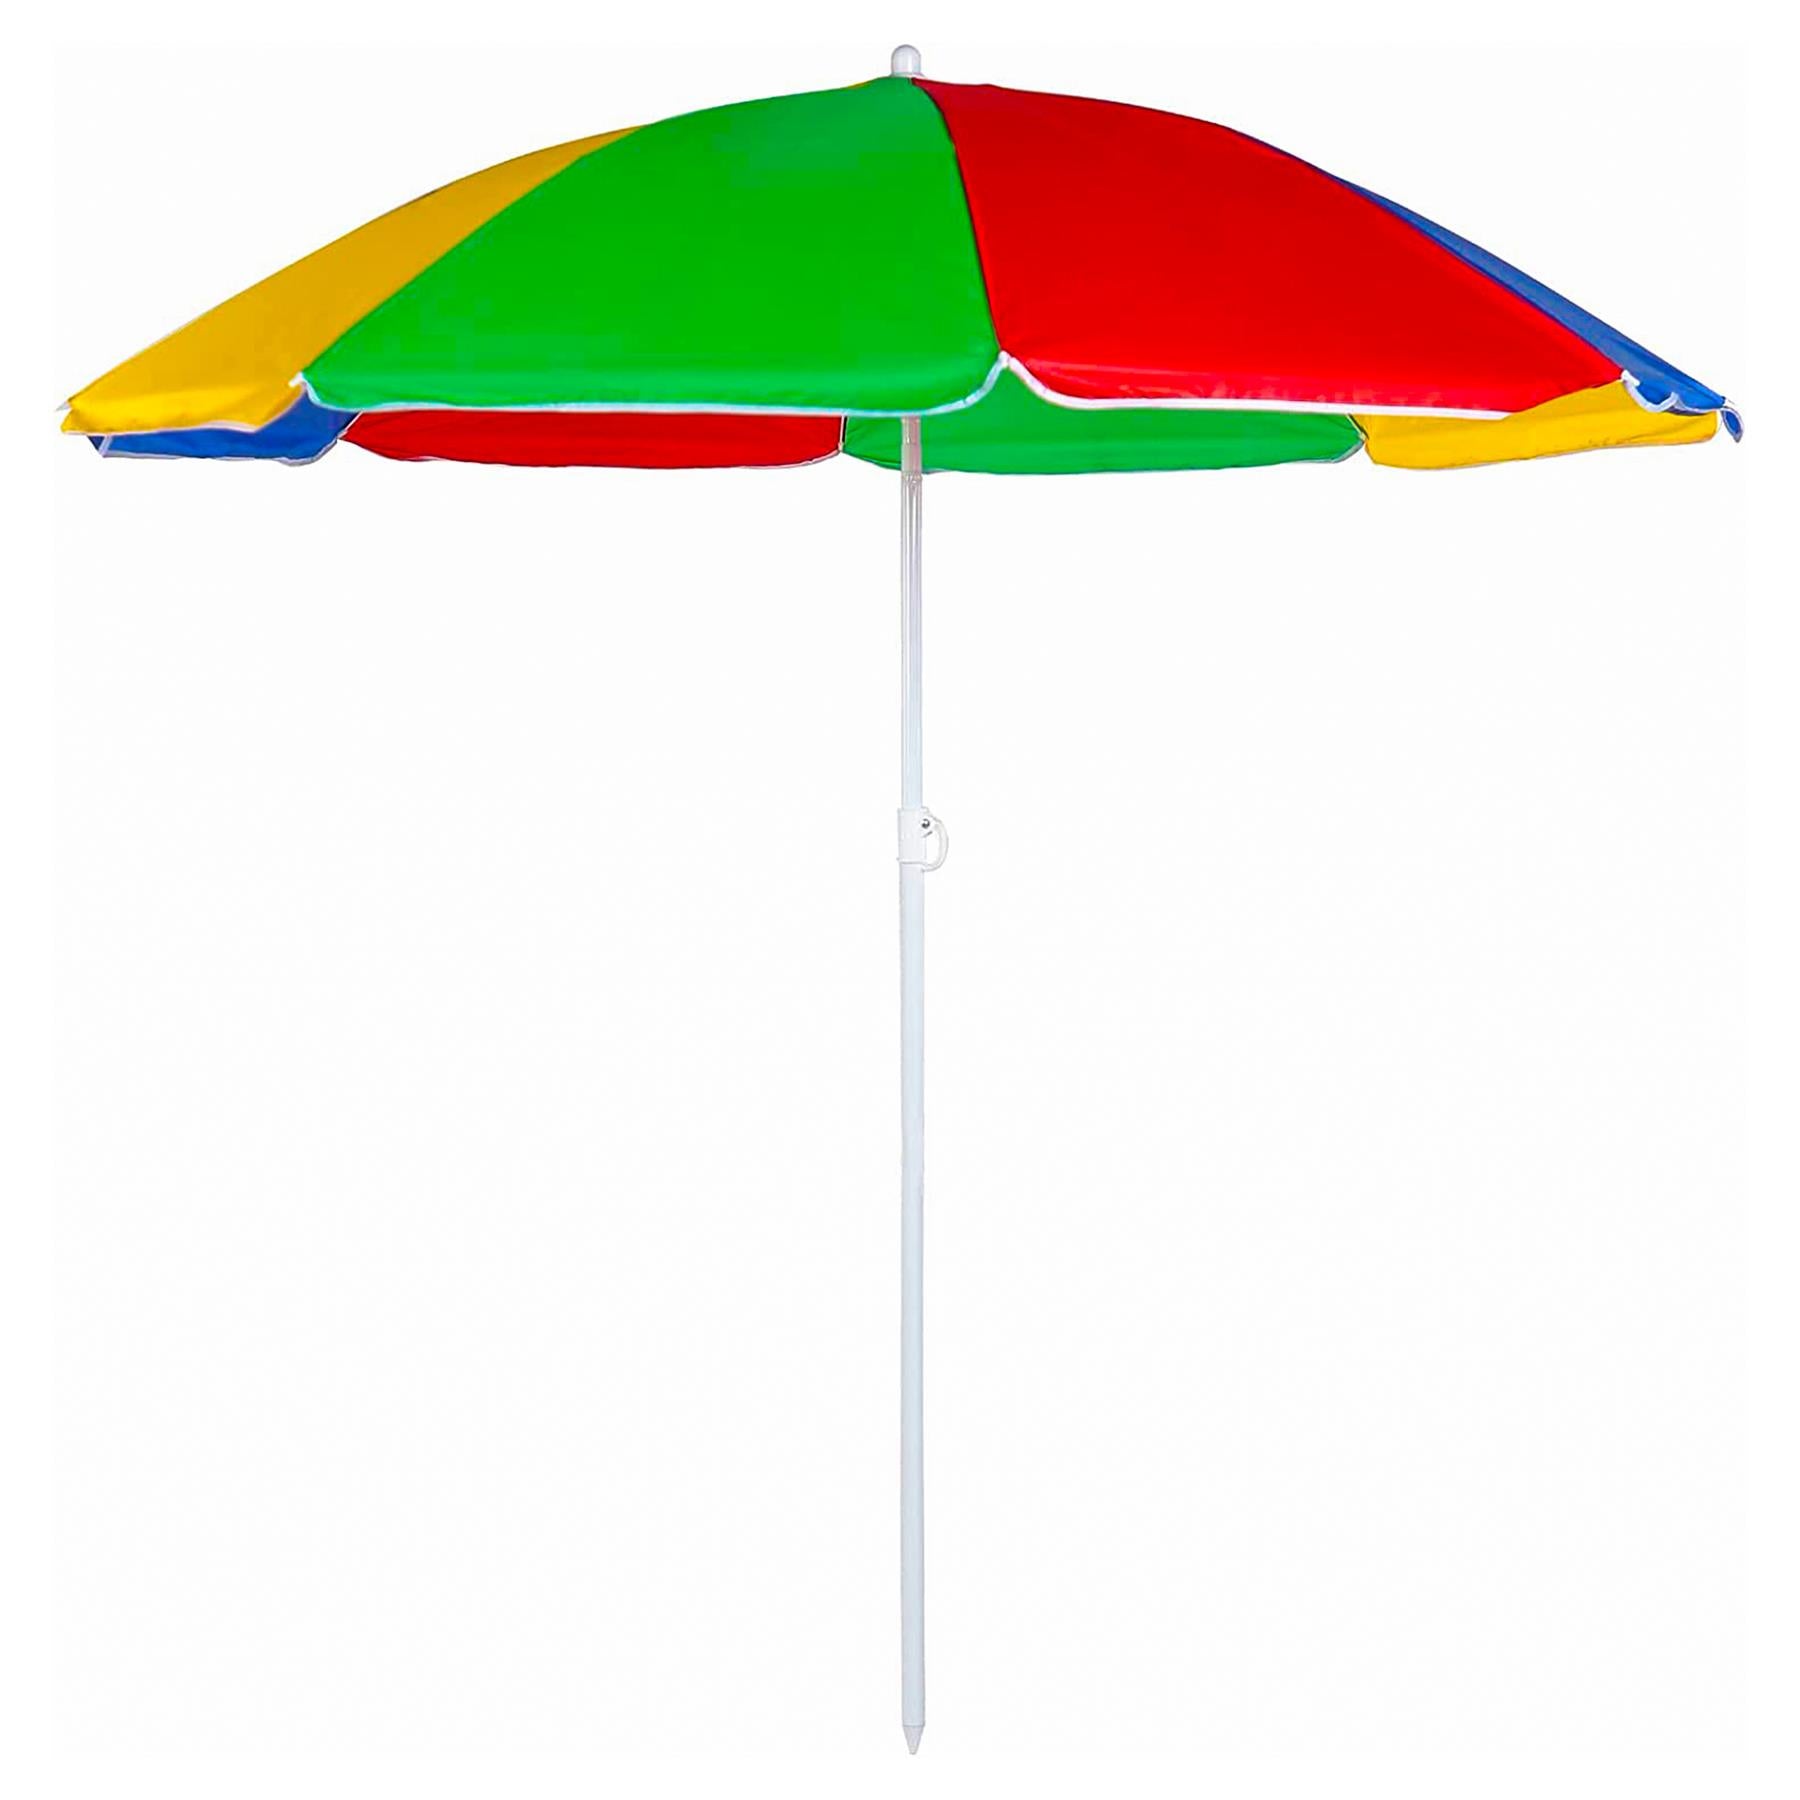 Multi-Coloured Beach Tilting Parasol 1.6M by The Magic Toy Shop - The Magic Toy Shop